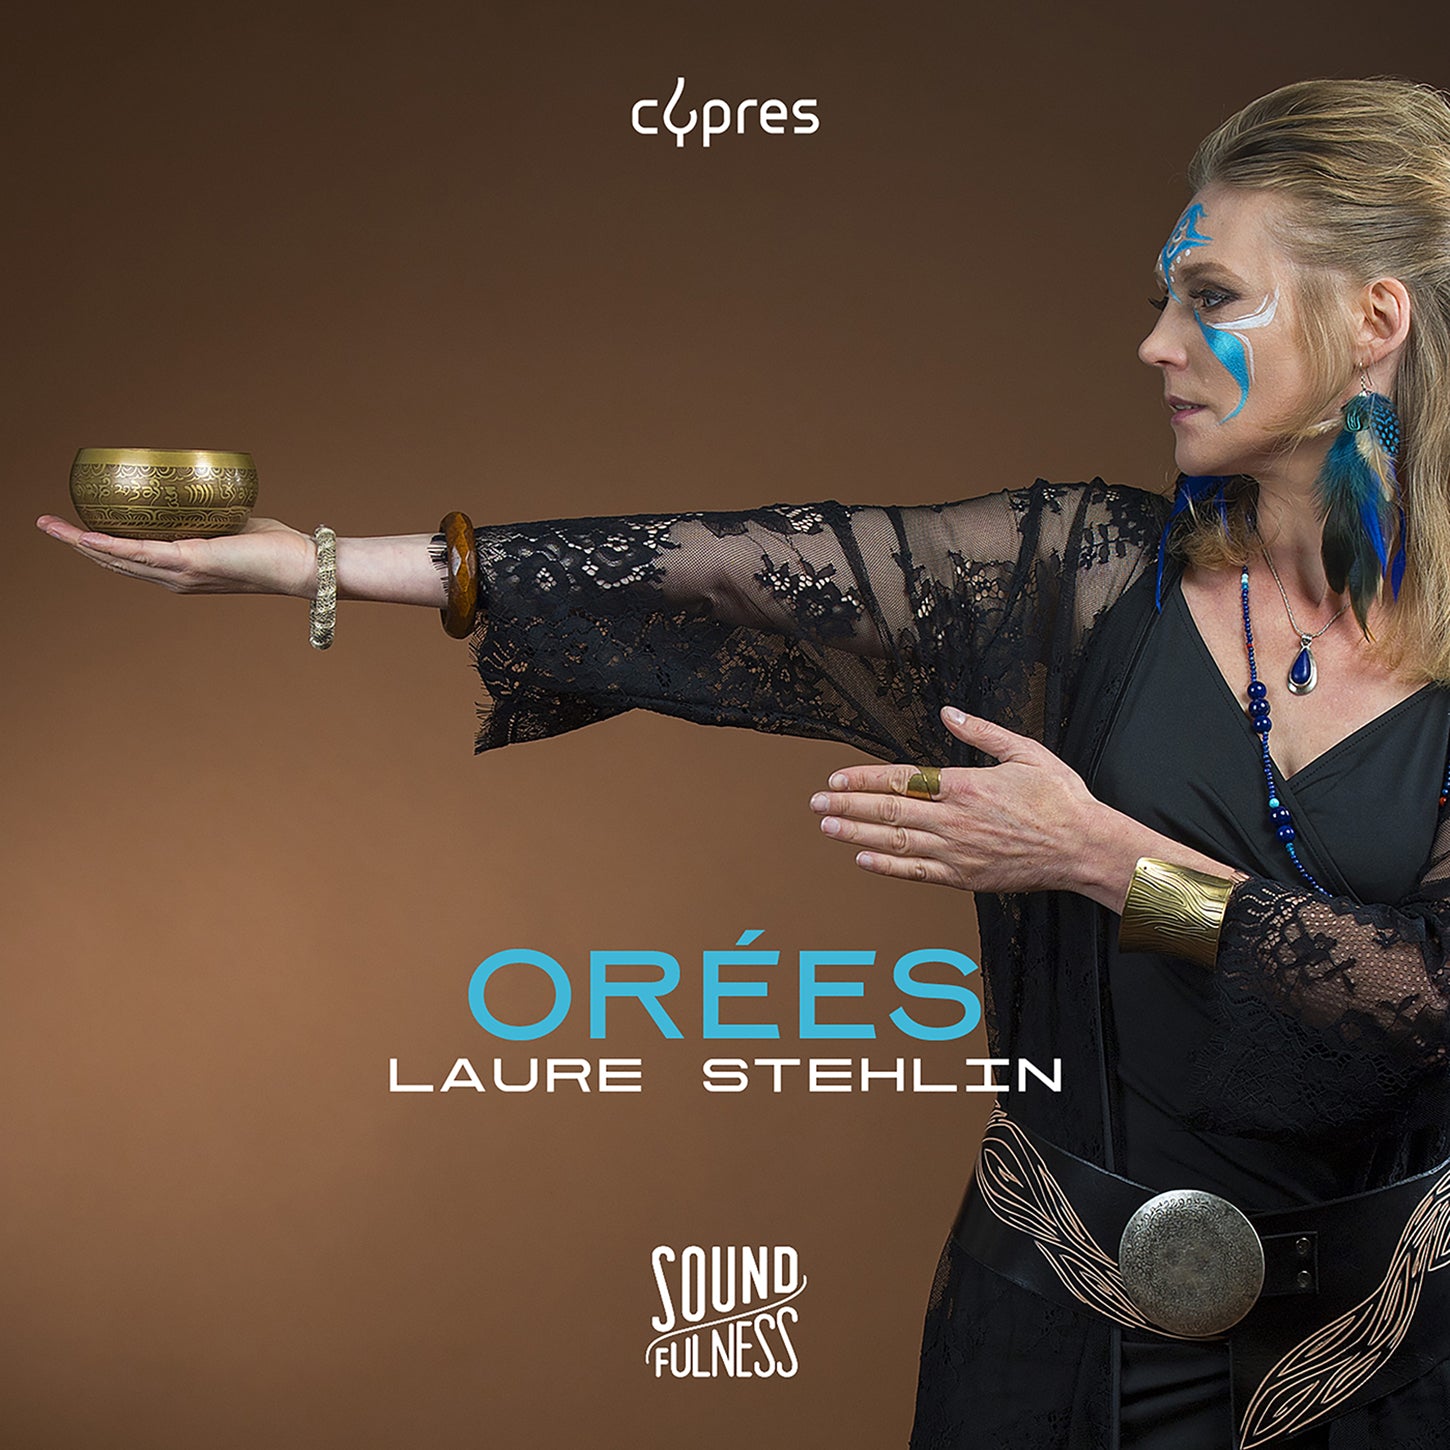 Laure Stehlin: Orees